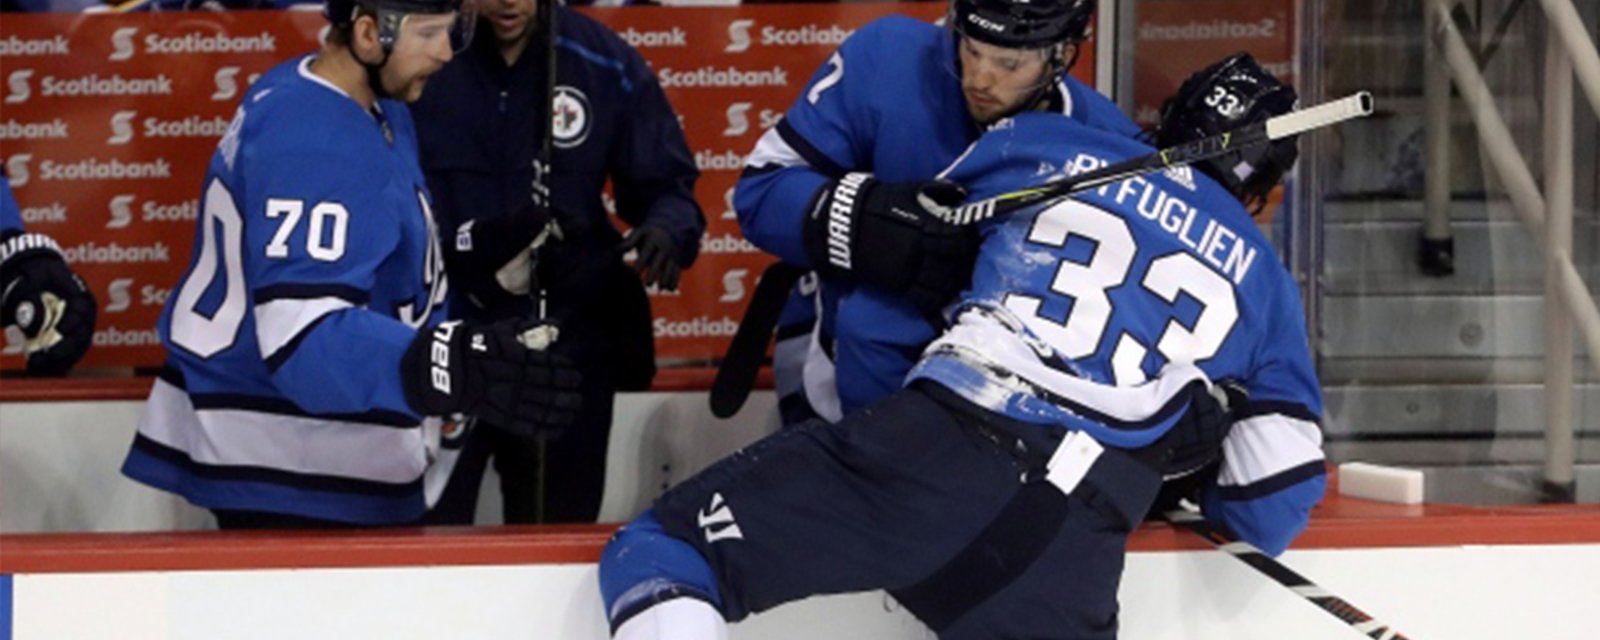 Report: Byfuglien and Jets under investigation following monster collision in last night’s game